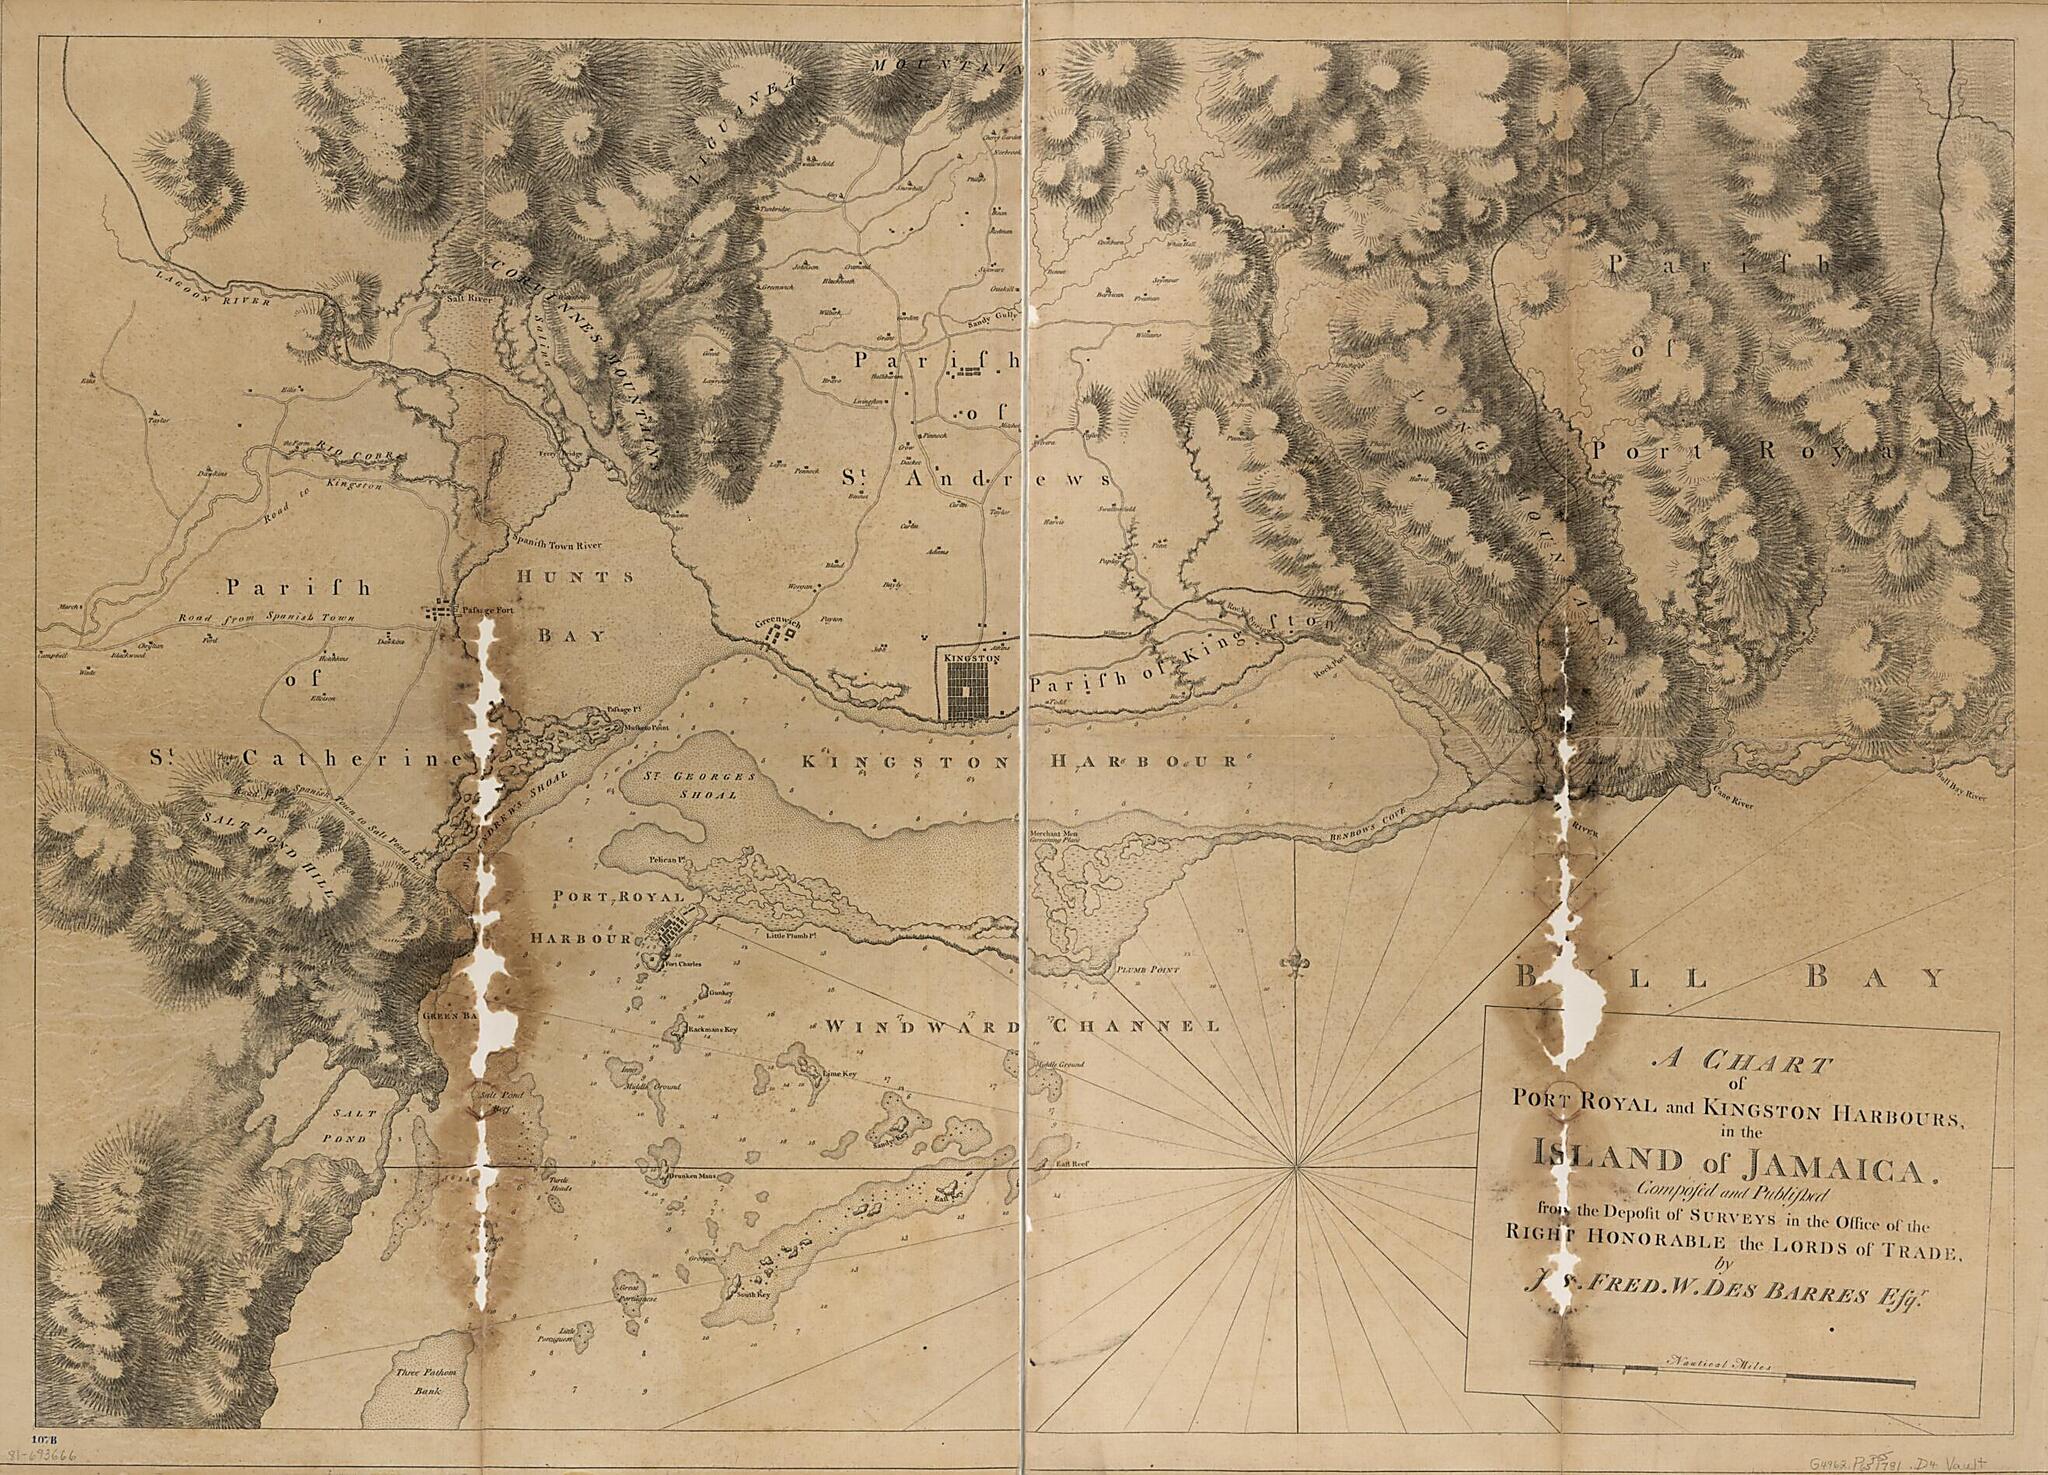 This old map of A Chart of Port Royal and Kingston Harbours In the Island of Jamaica from 1781 was created by Joseph F. W. (Joseph Frederick Wallet) Des Barres in 1781